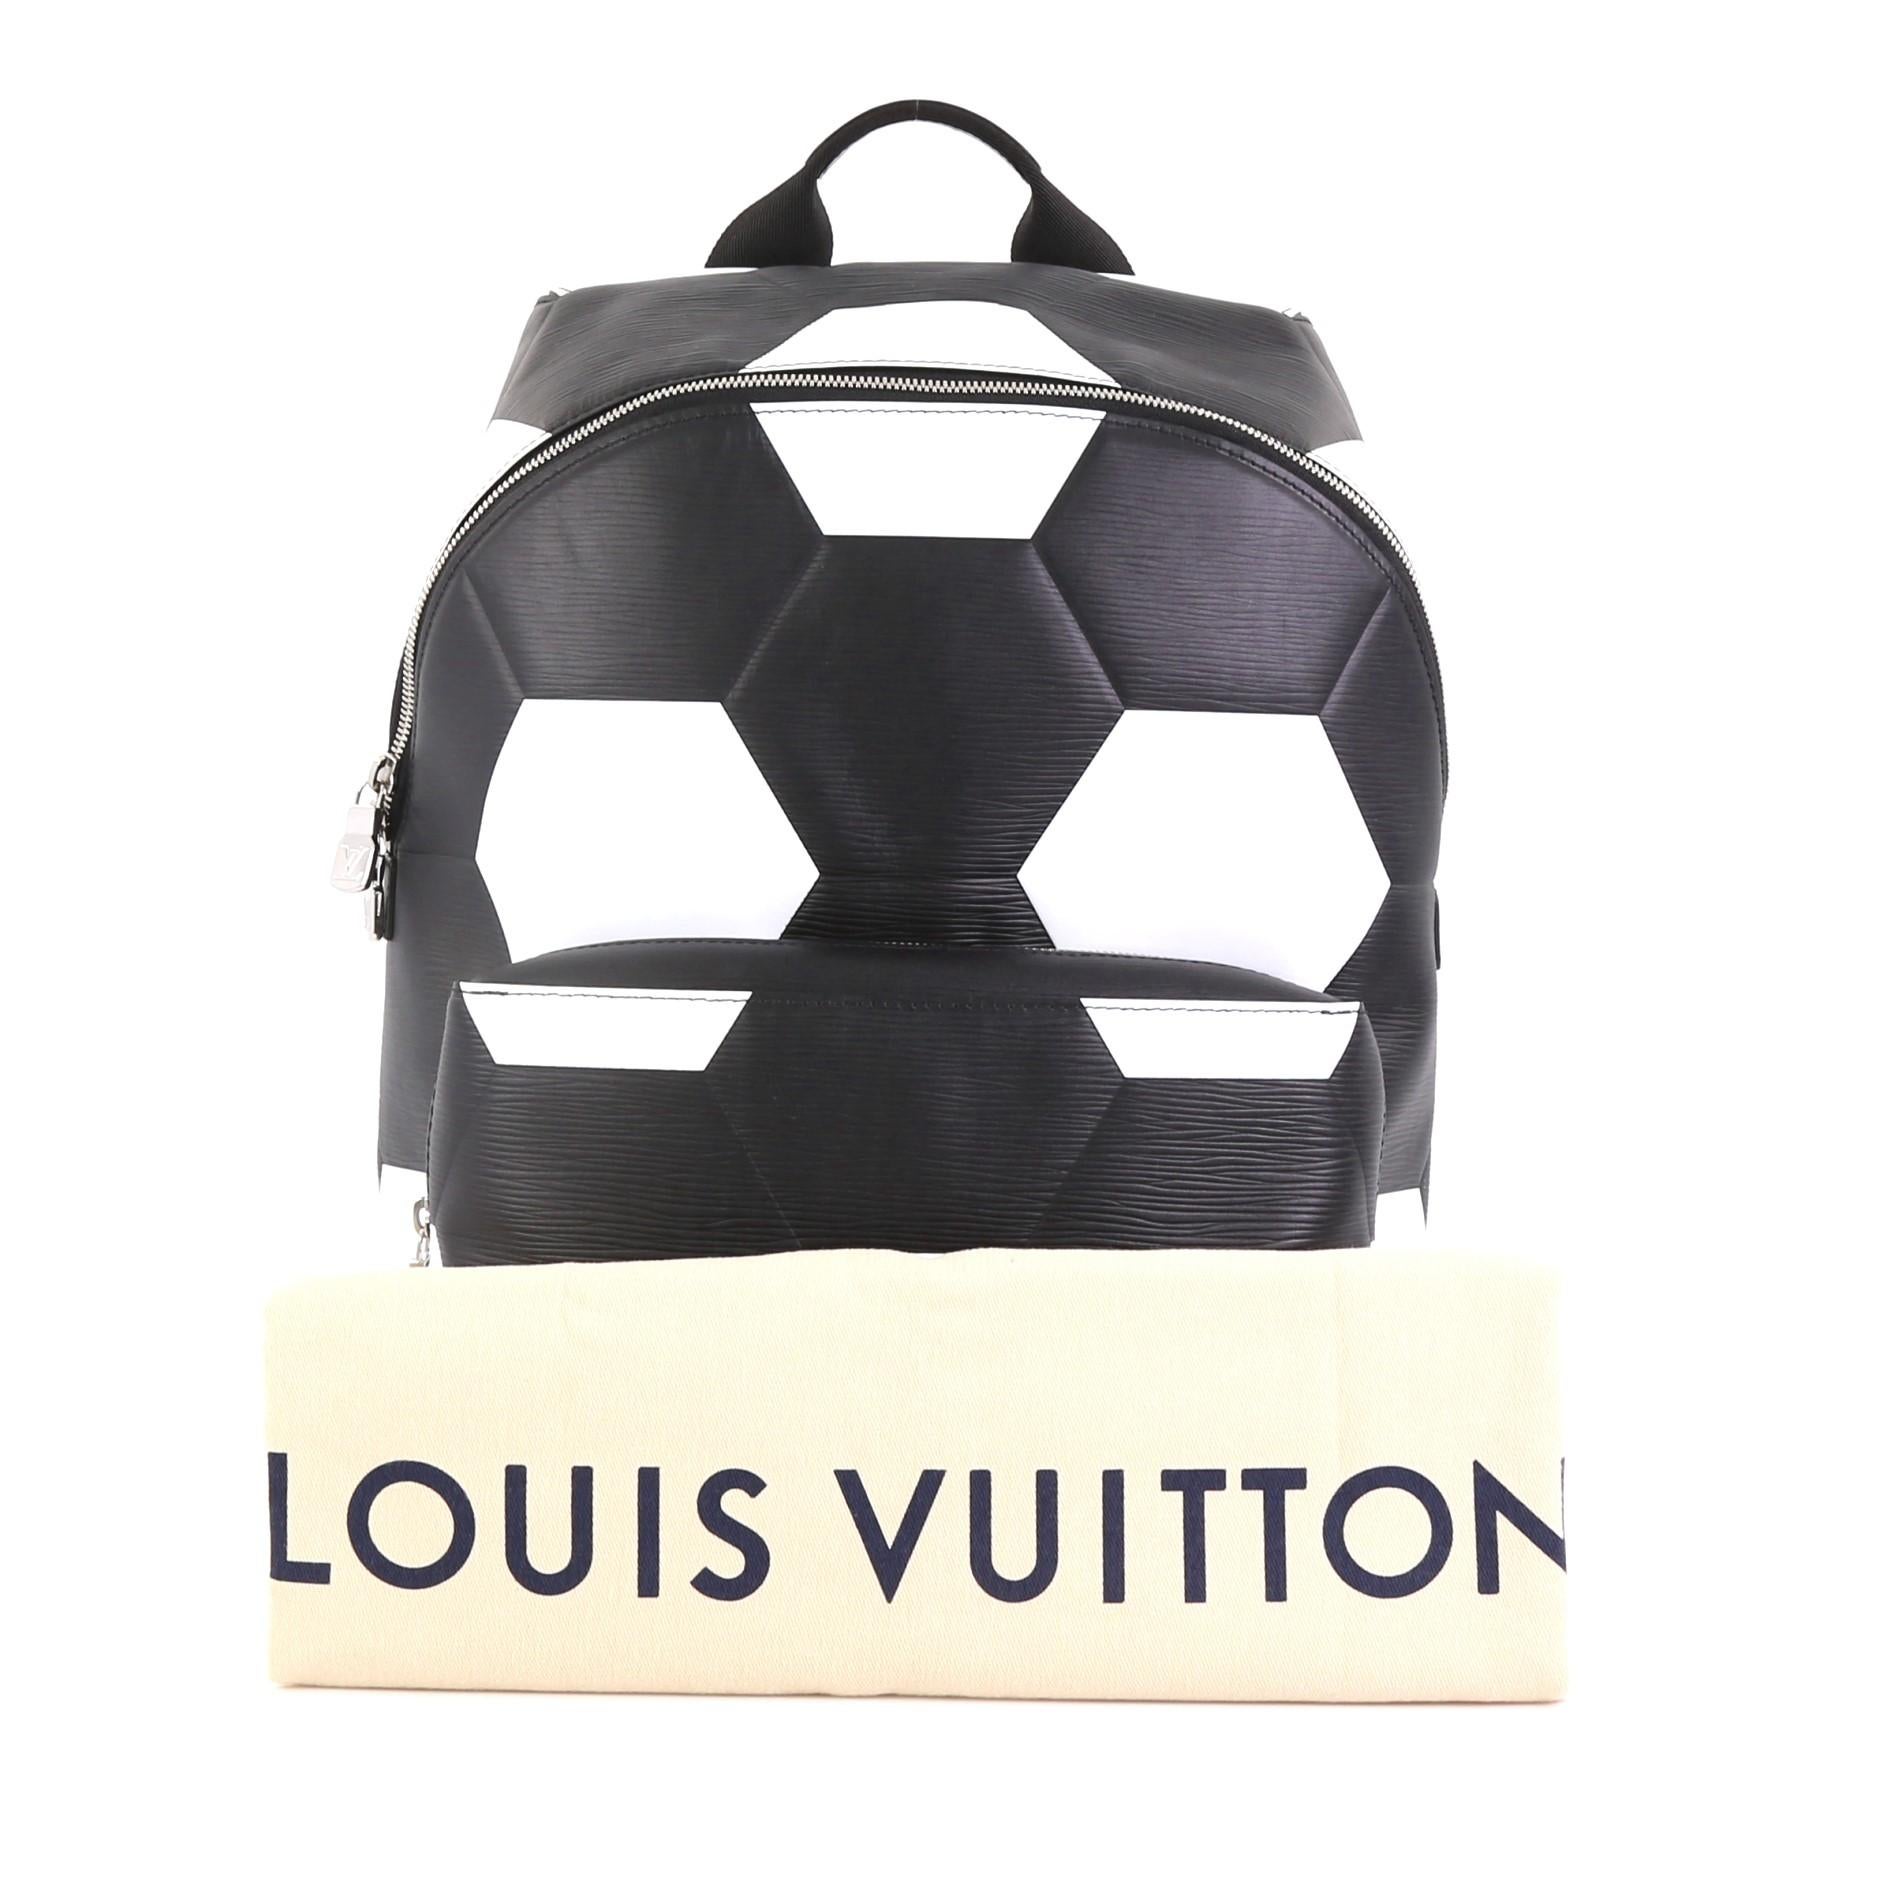 This Louis Vuitton Apollo Backpack Limited Edition FIFA World Cup Epi Leather, crafted from black and white epi leather, features a top handle, adjustable back straps, hexagonal pattern of footballs, exterior front zip pocket, and silver-tone